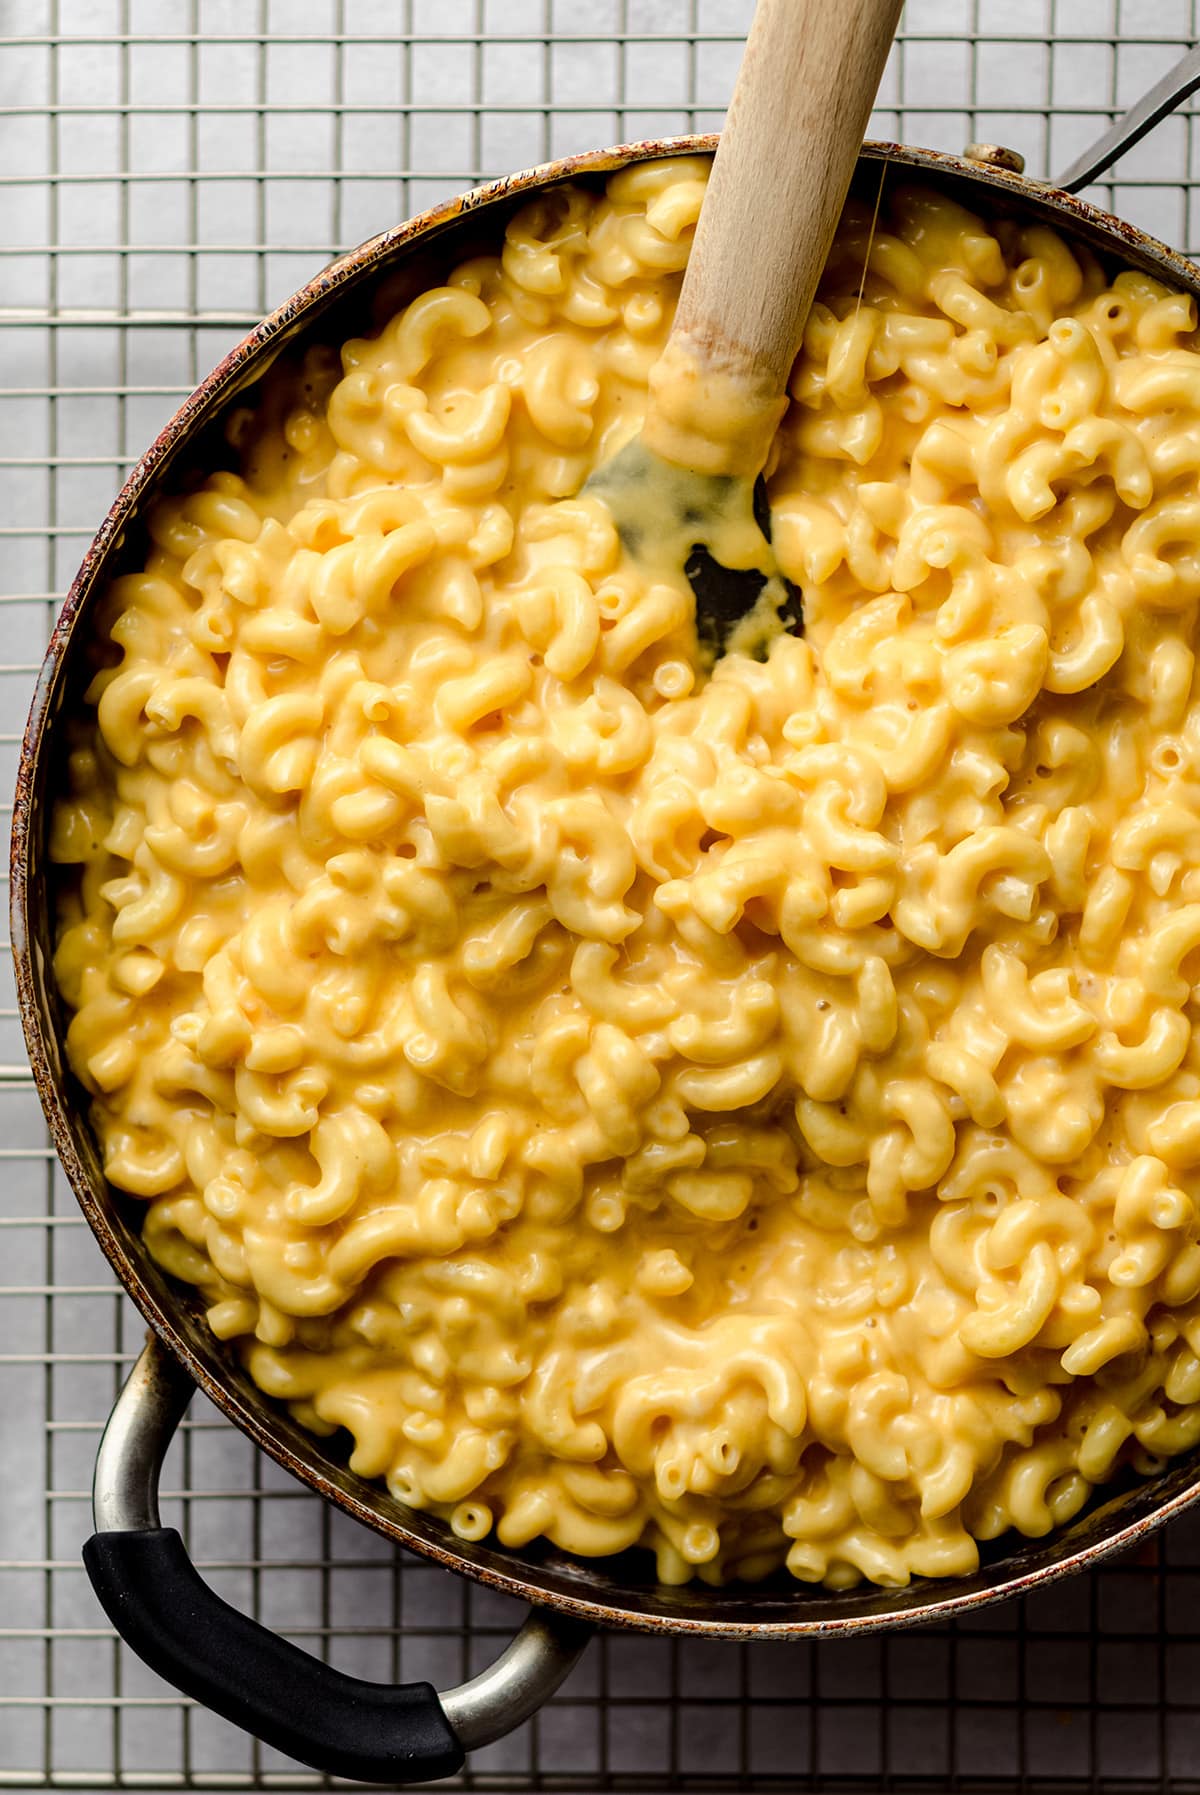 A skillet filled with homemade Mac and cheese and a wooden spoon.